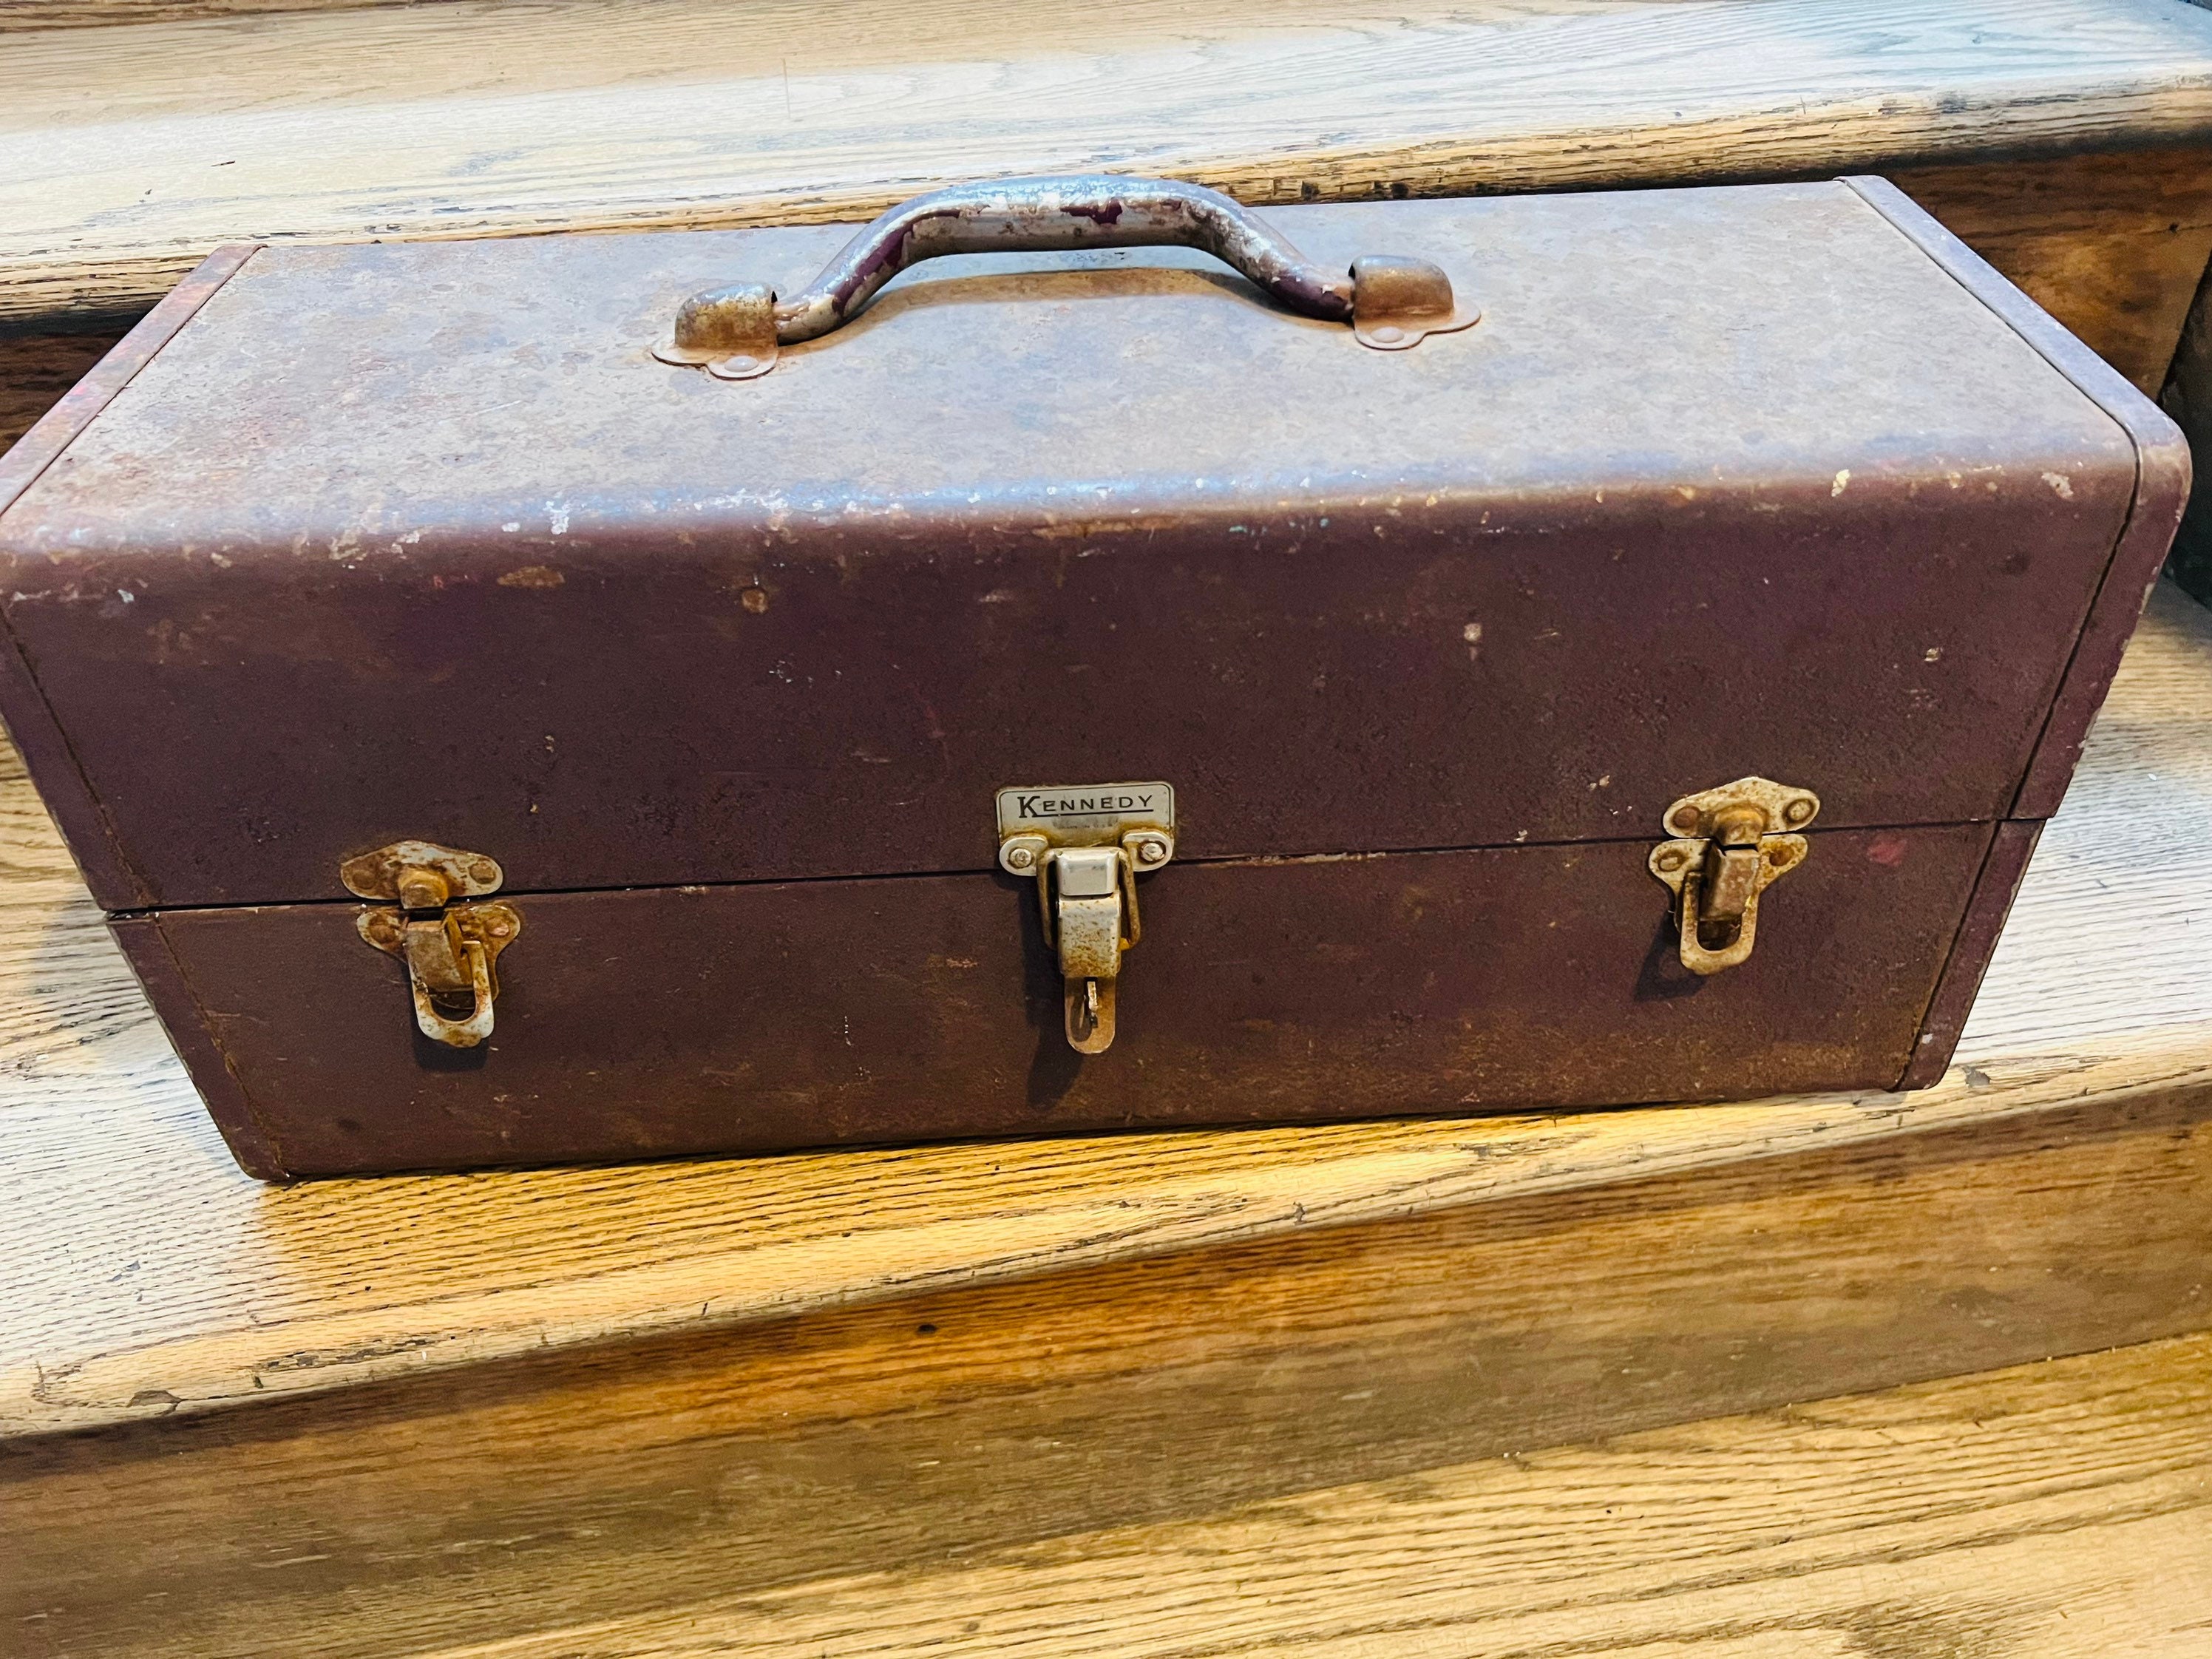 Rusty Old Tackle Box Vintage Metal Fishing Carrying Case Repurposed Decor 